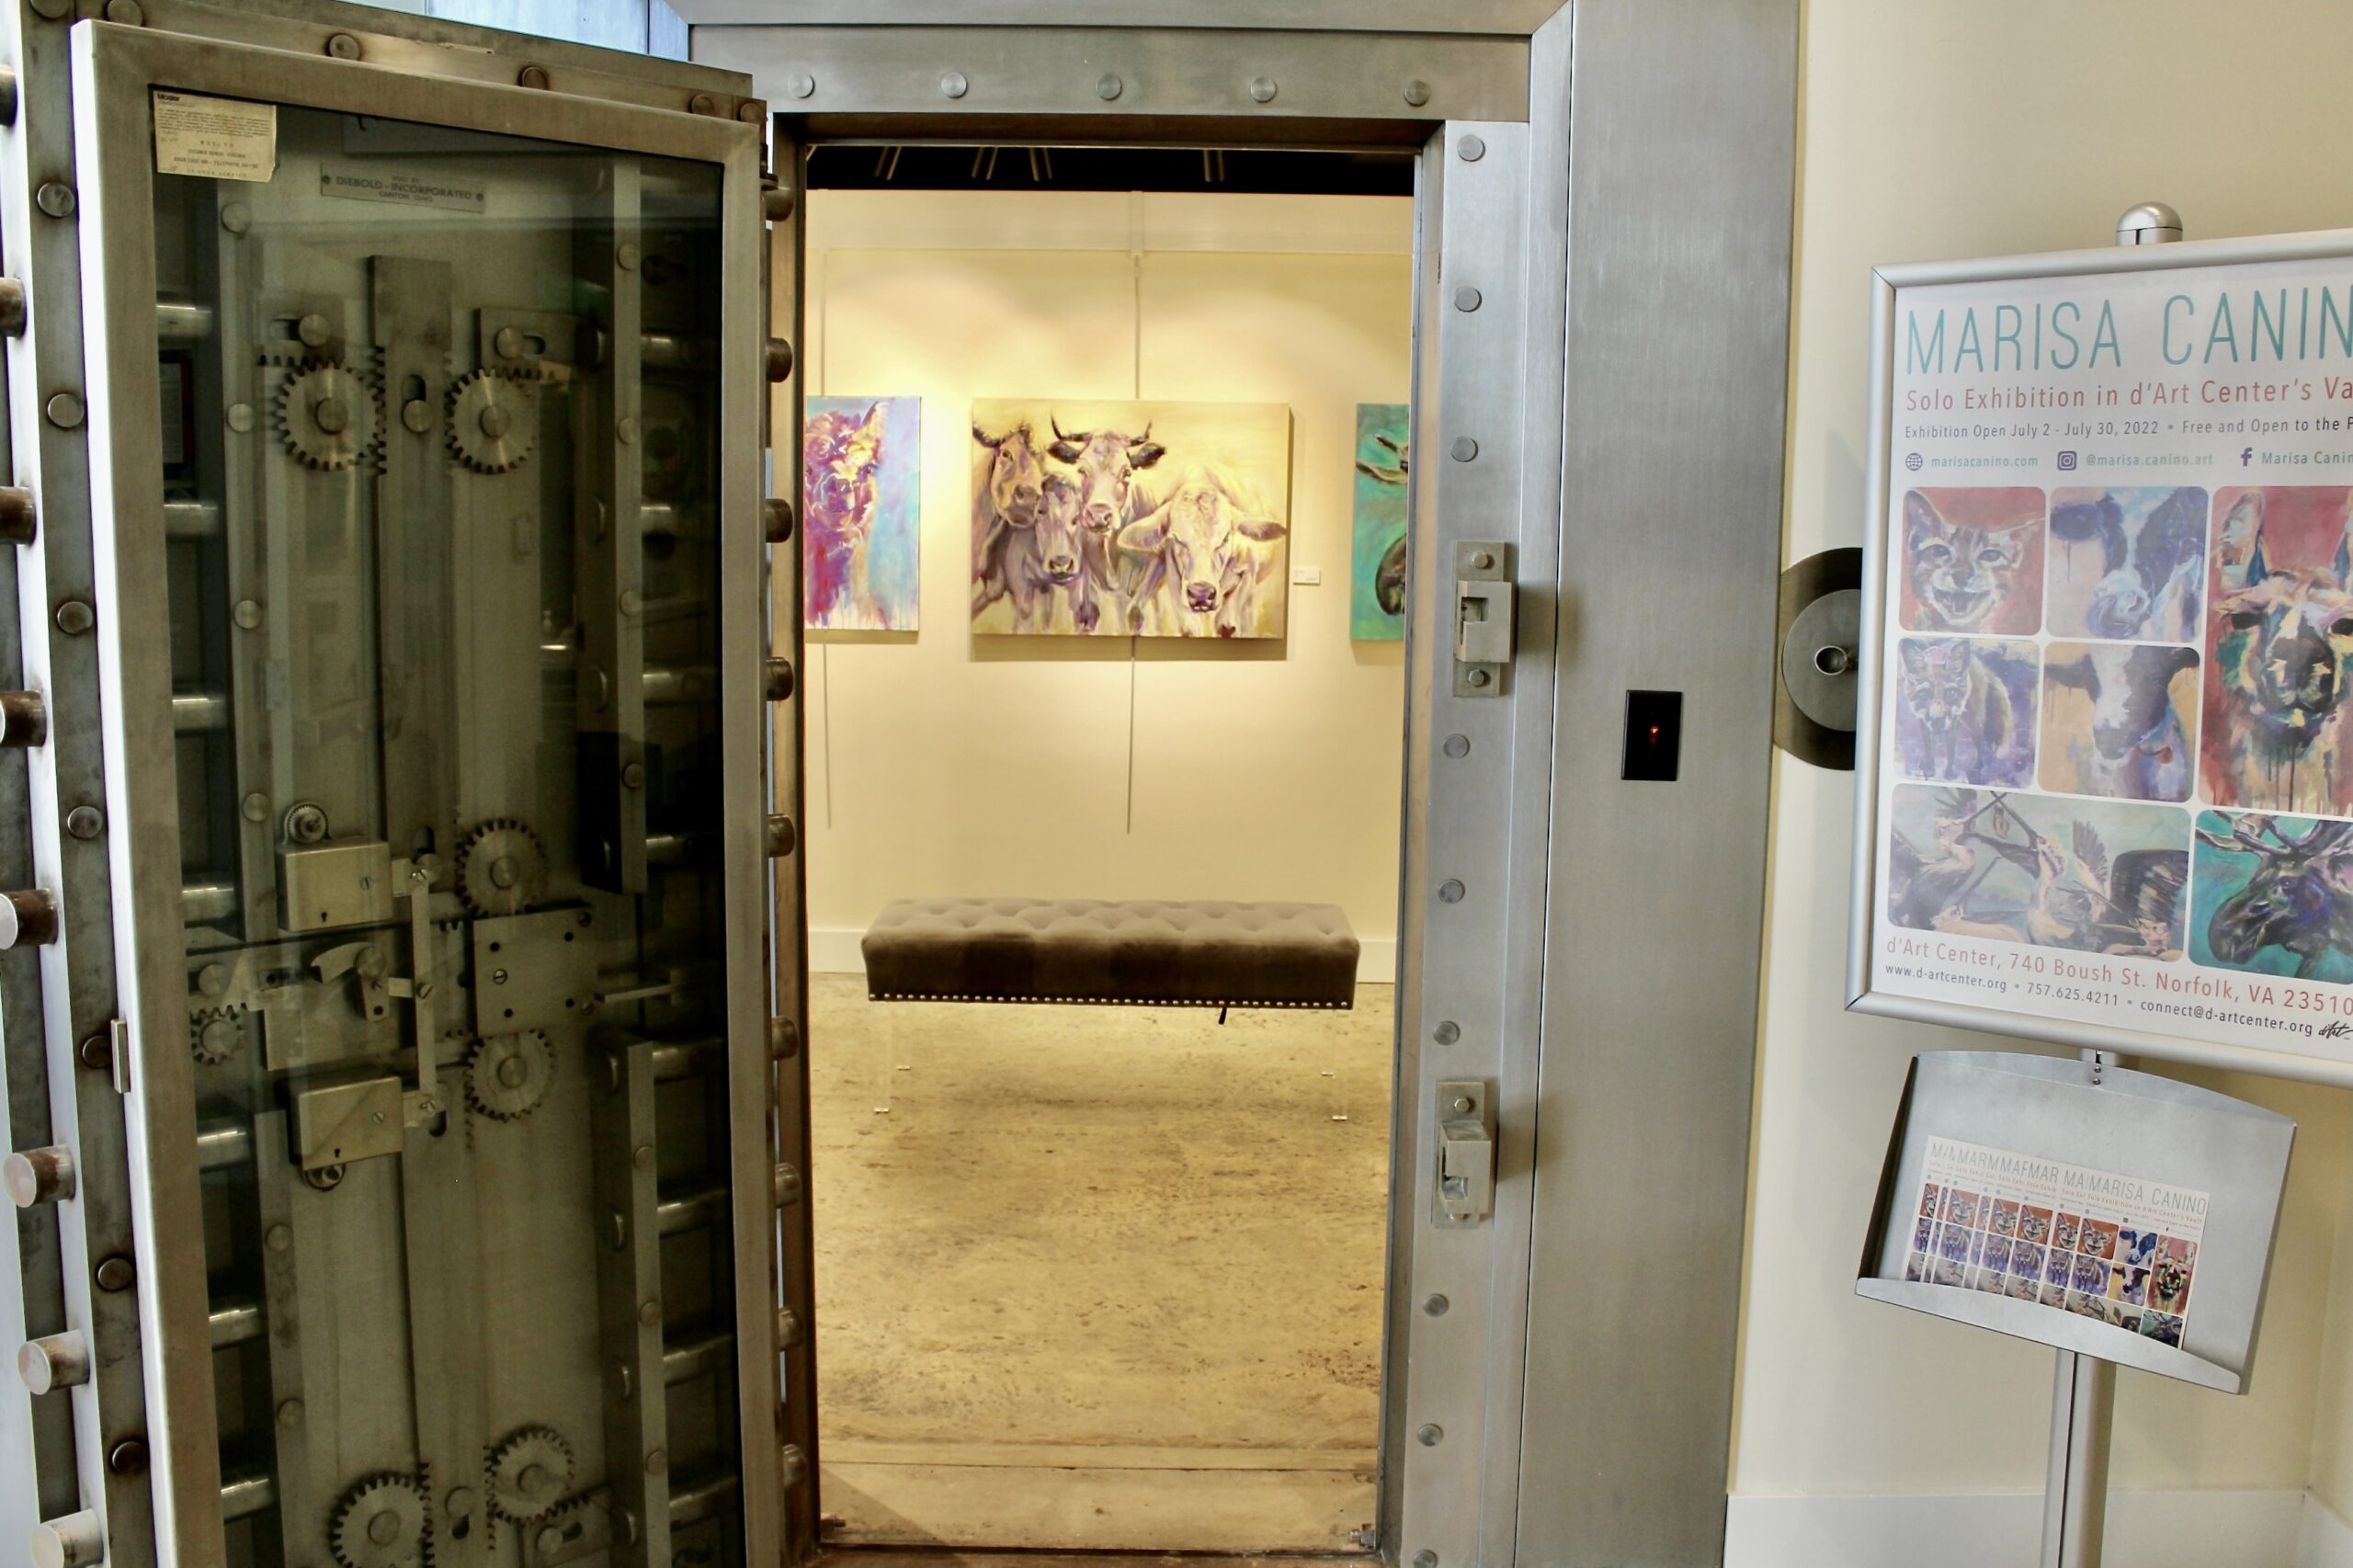 Image of the entrance to d'Art Center's vault exhibition space